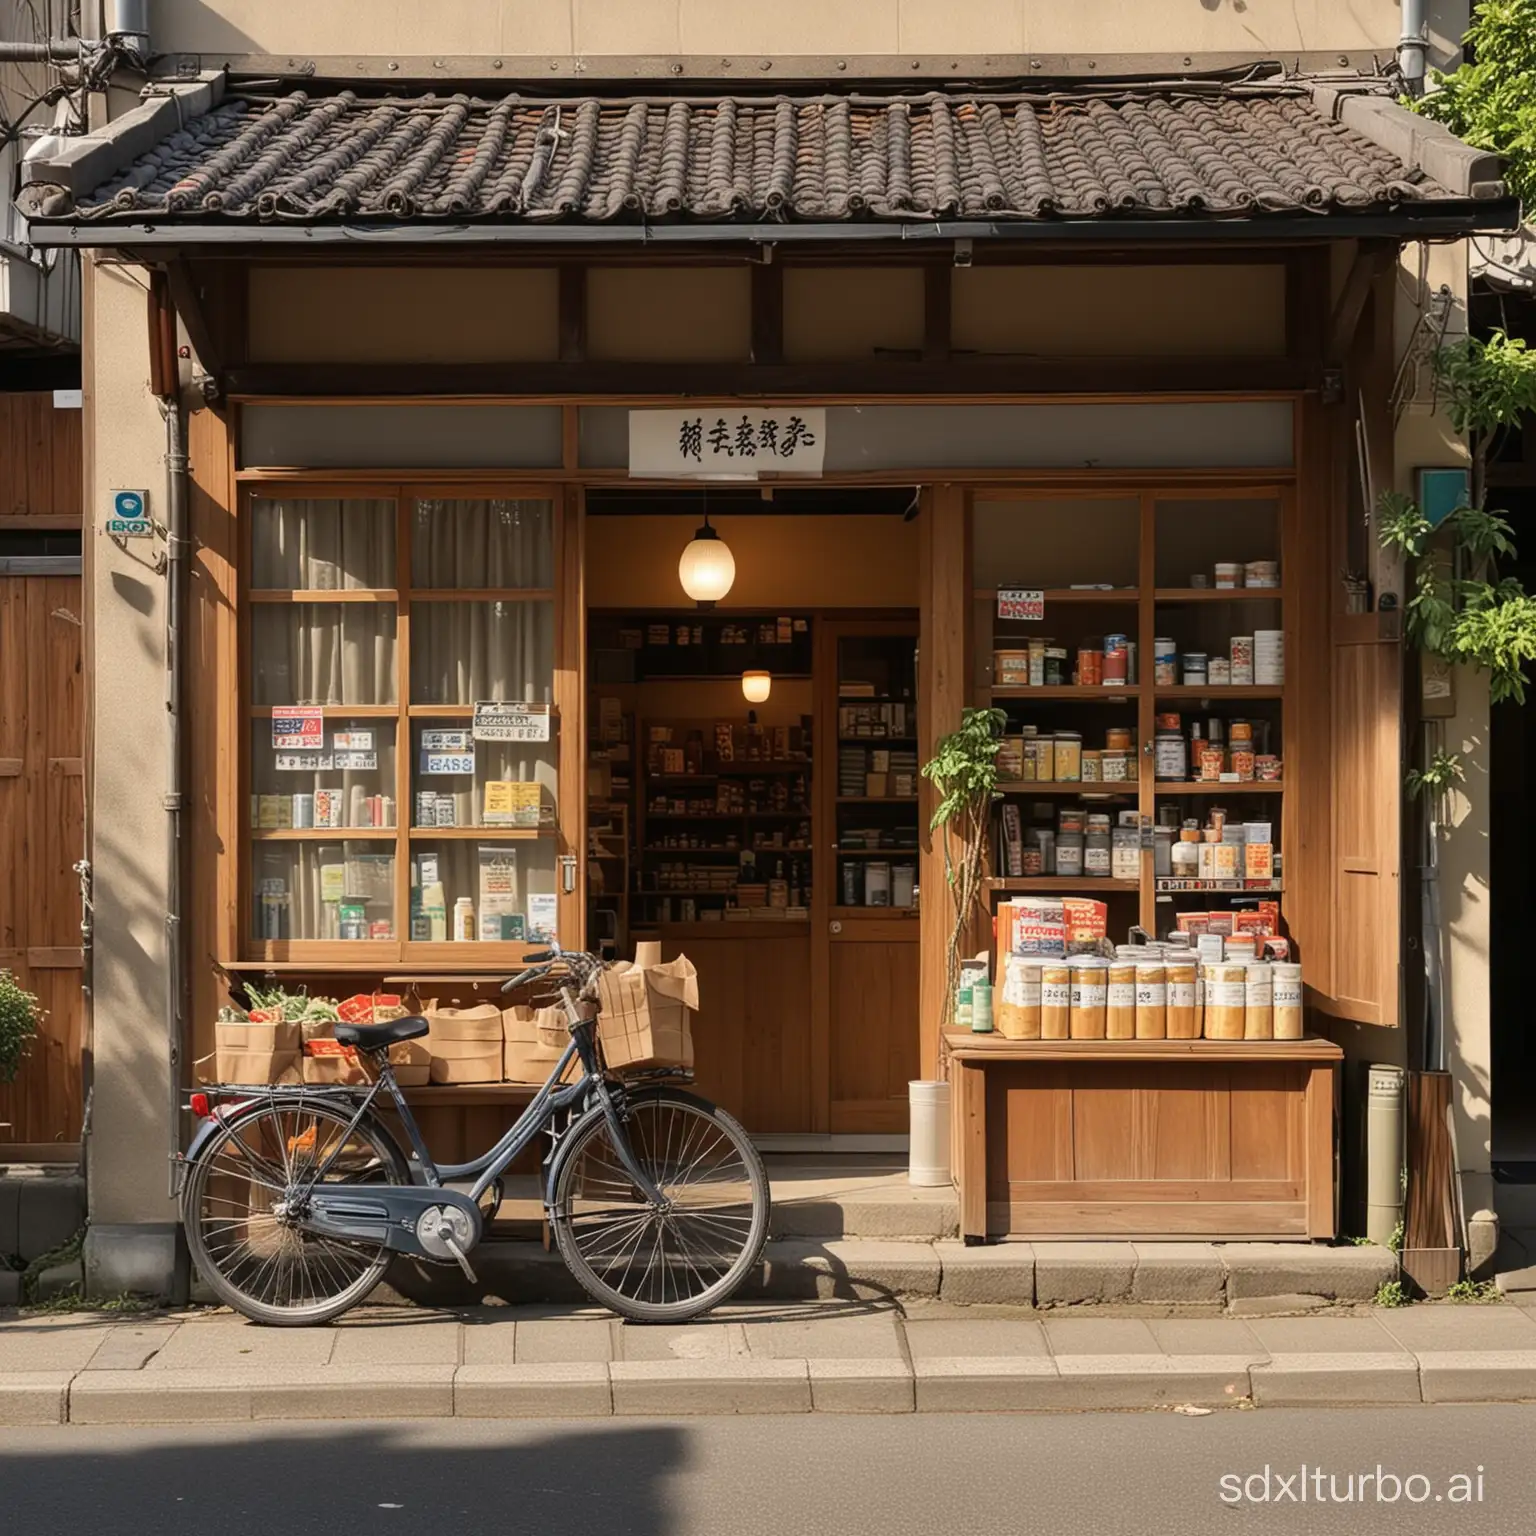 Nostalgic-View-of-Vintage-Japanese-Grocery-Store-from-1960s